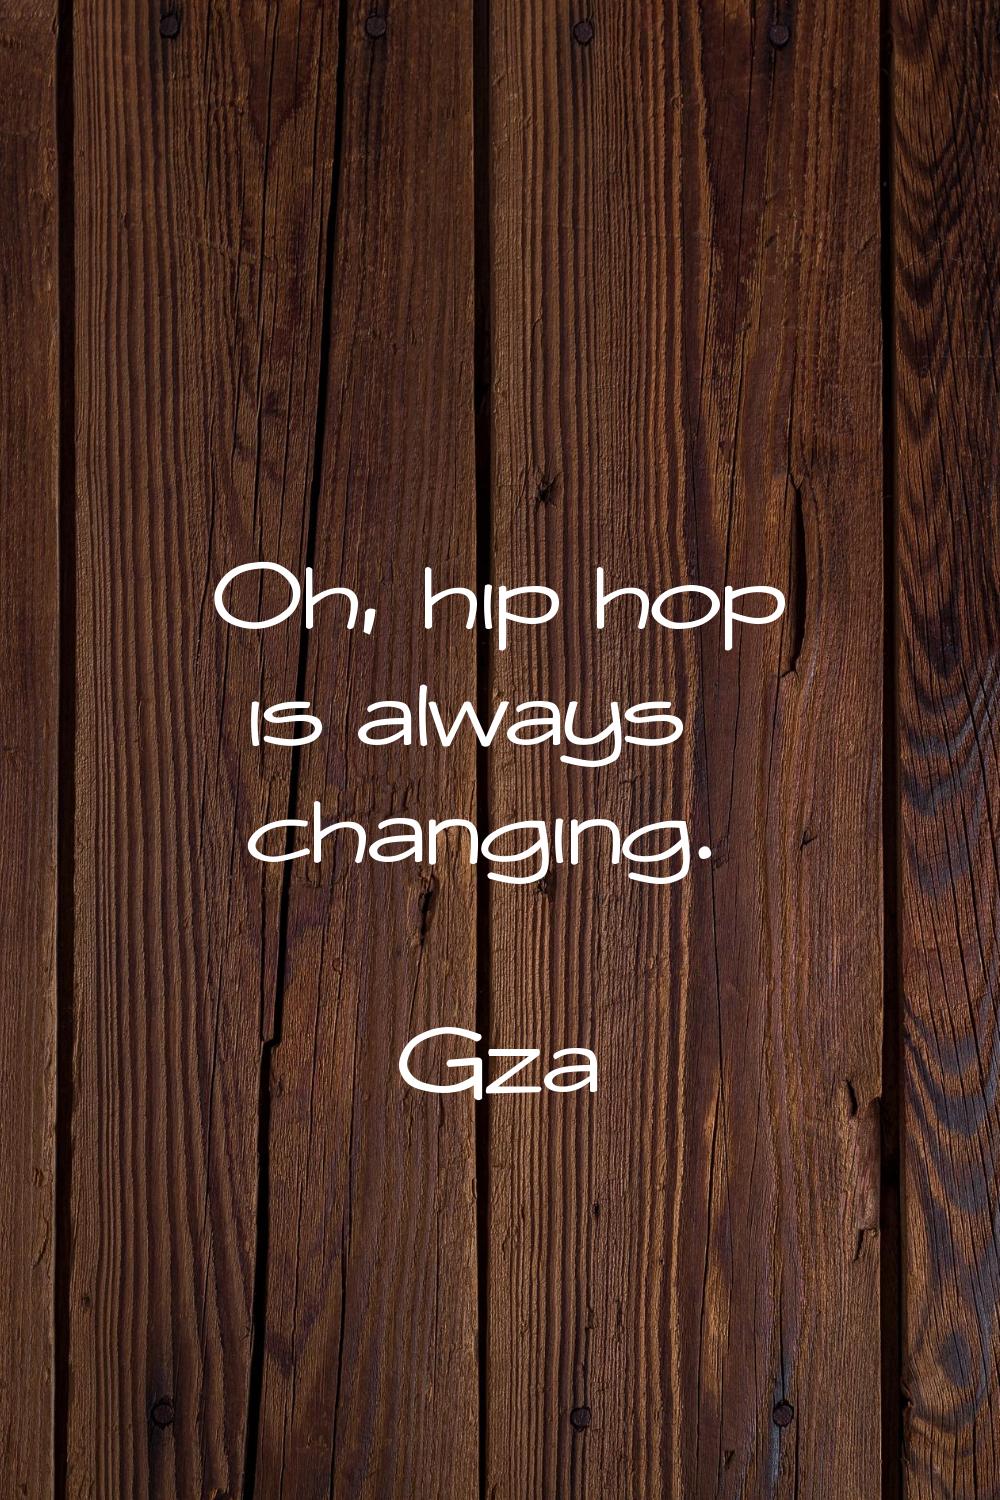 Oh, hip hop is always changing.